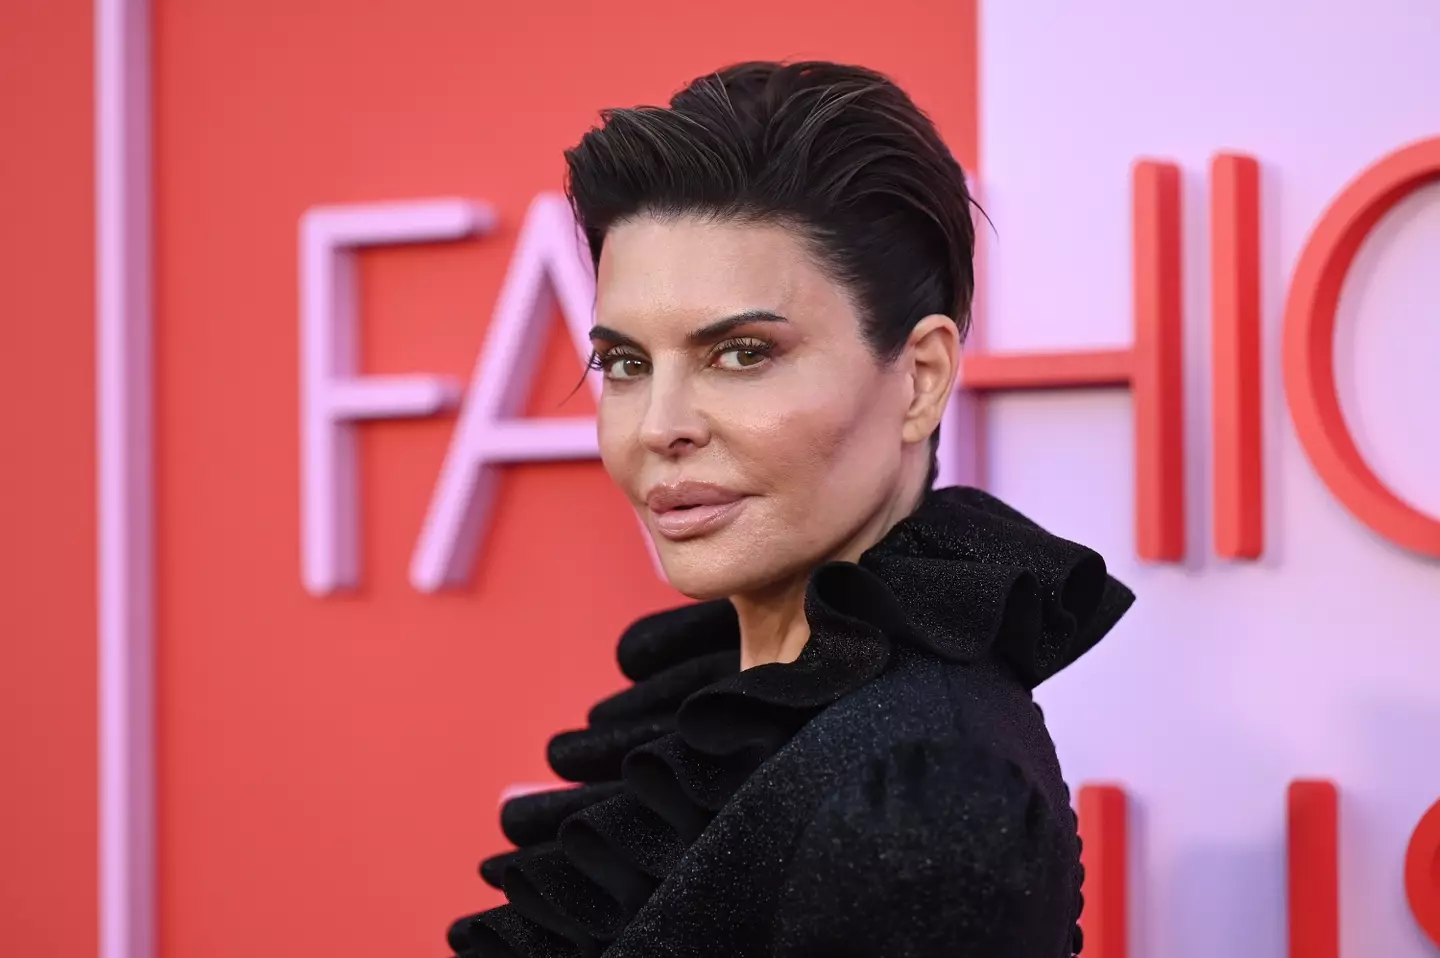 Lisa Rinna has spoken out about her 'changing appearance'. (Gilbert Flores/Variety via Getty Images)